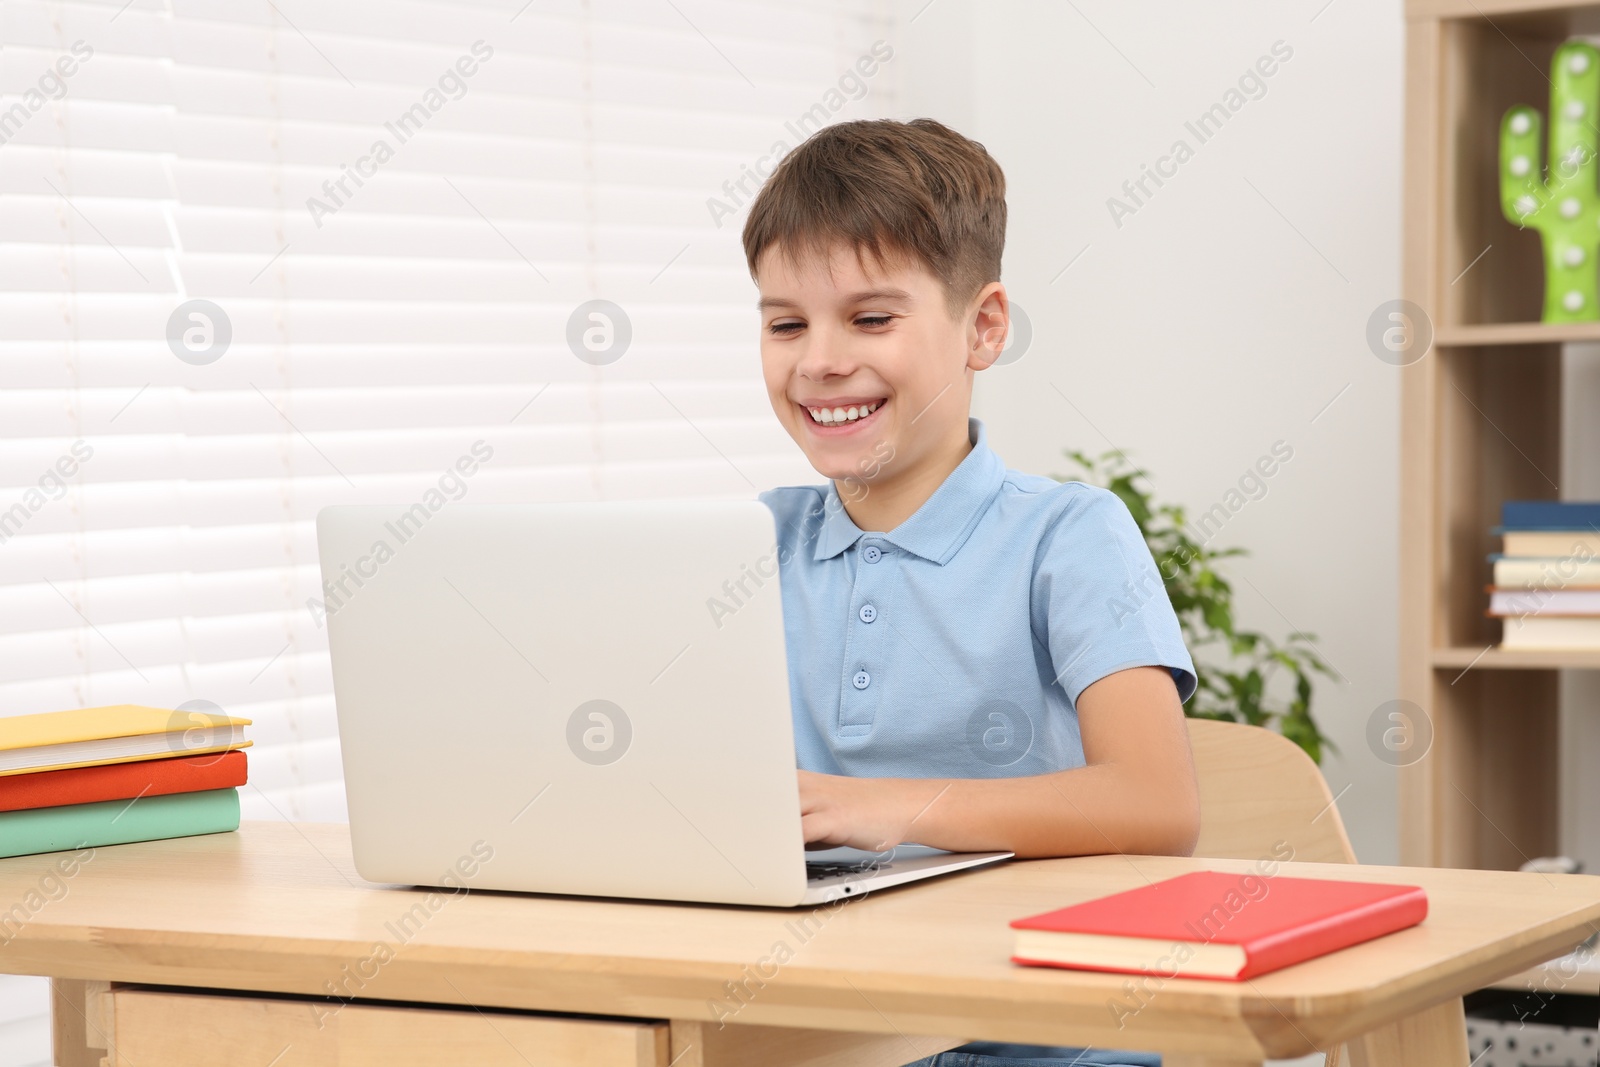 Photo of Smiling boy using laptop at desk in room. Home workplace